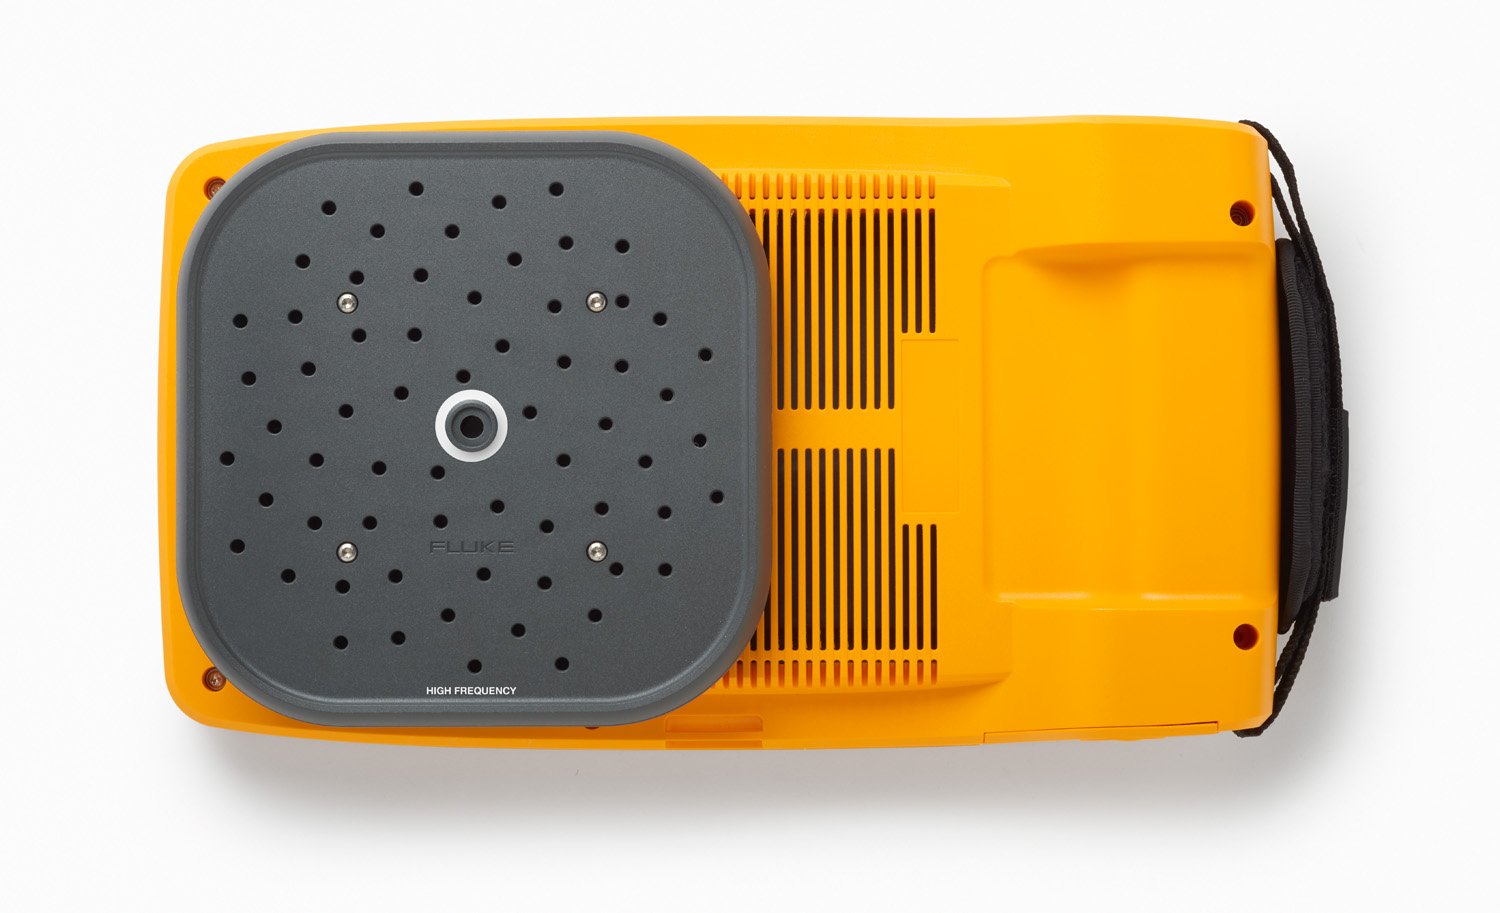 Acoustic imaging technology in the Fluke ii910 sees sound in even in noisy environments.